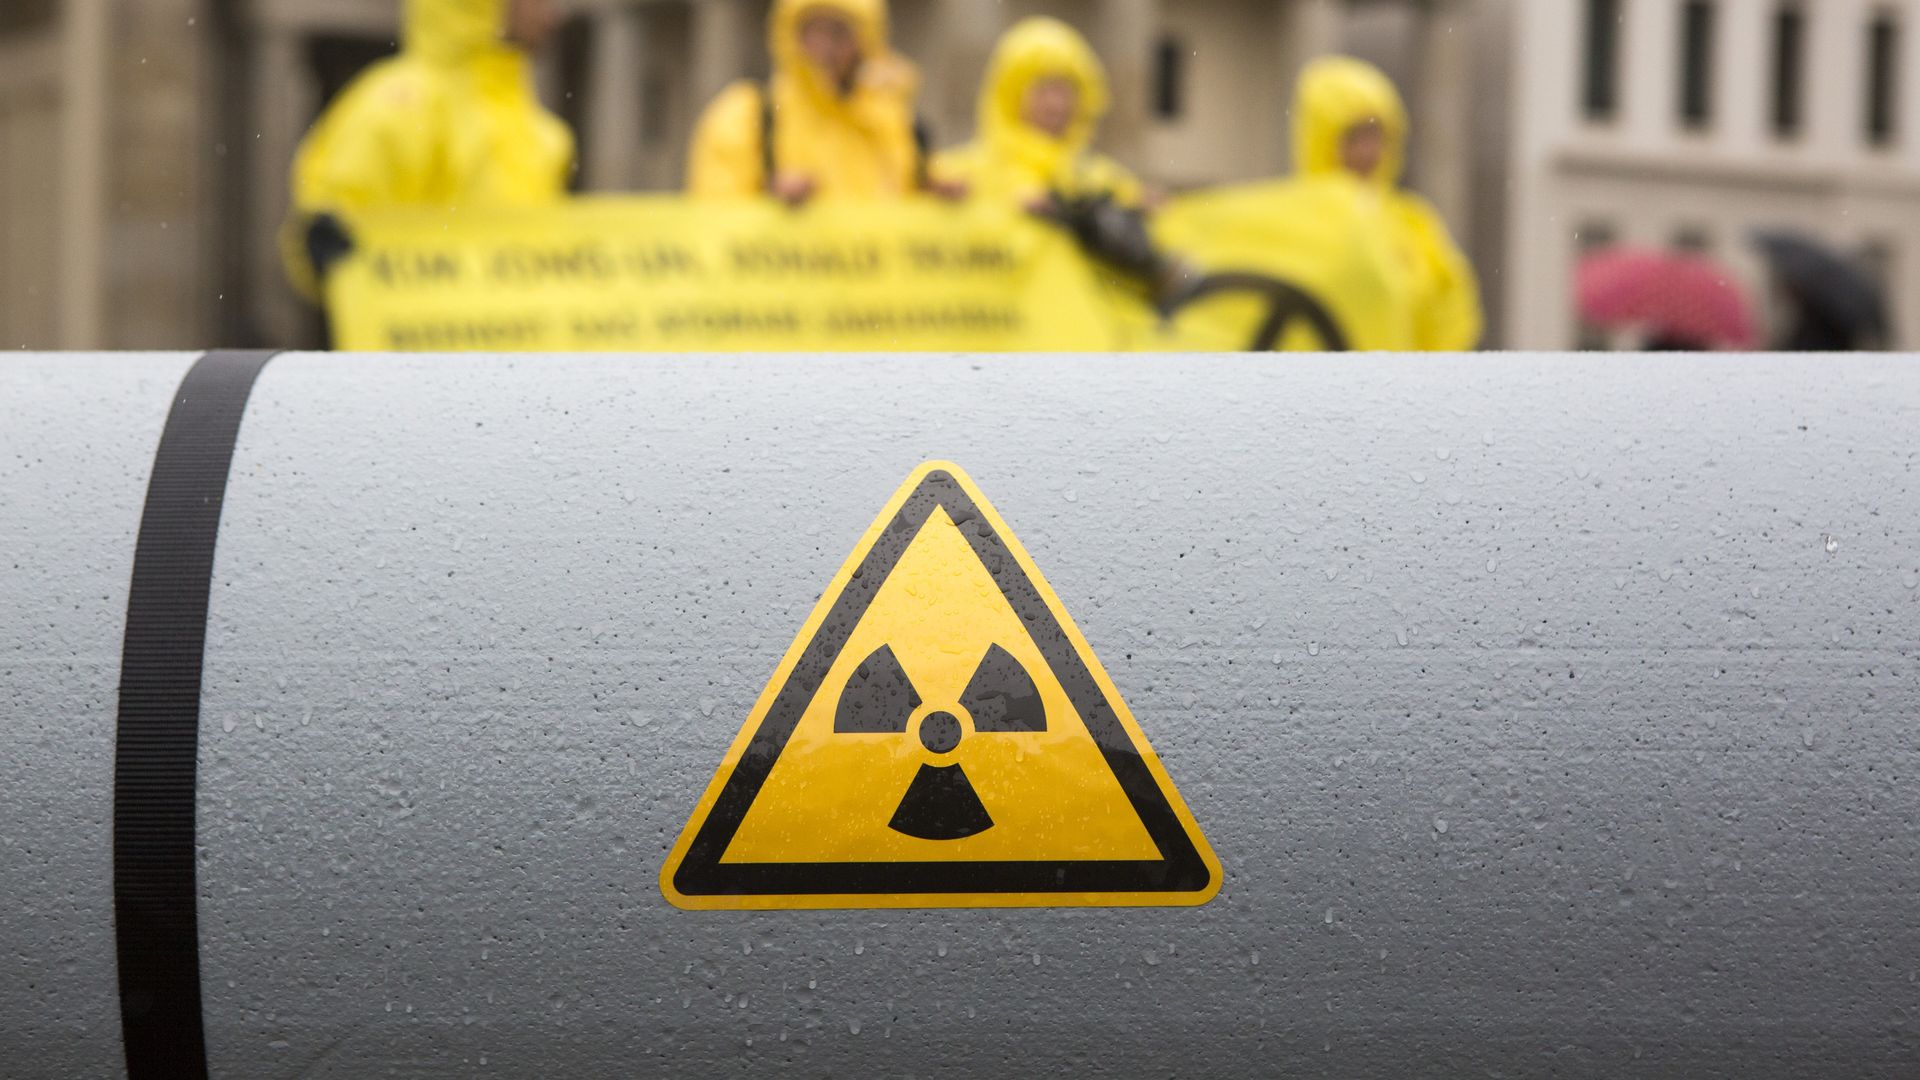 Anti-nuclear activists in Germany